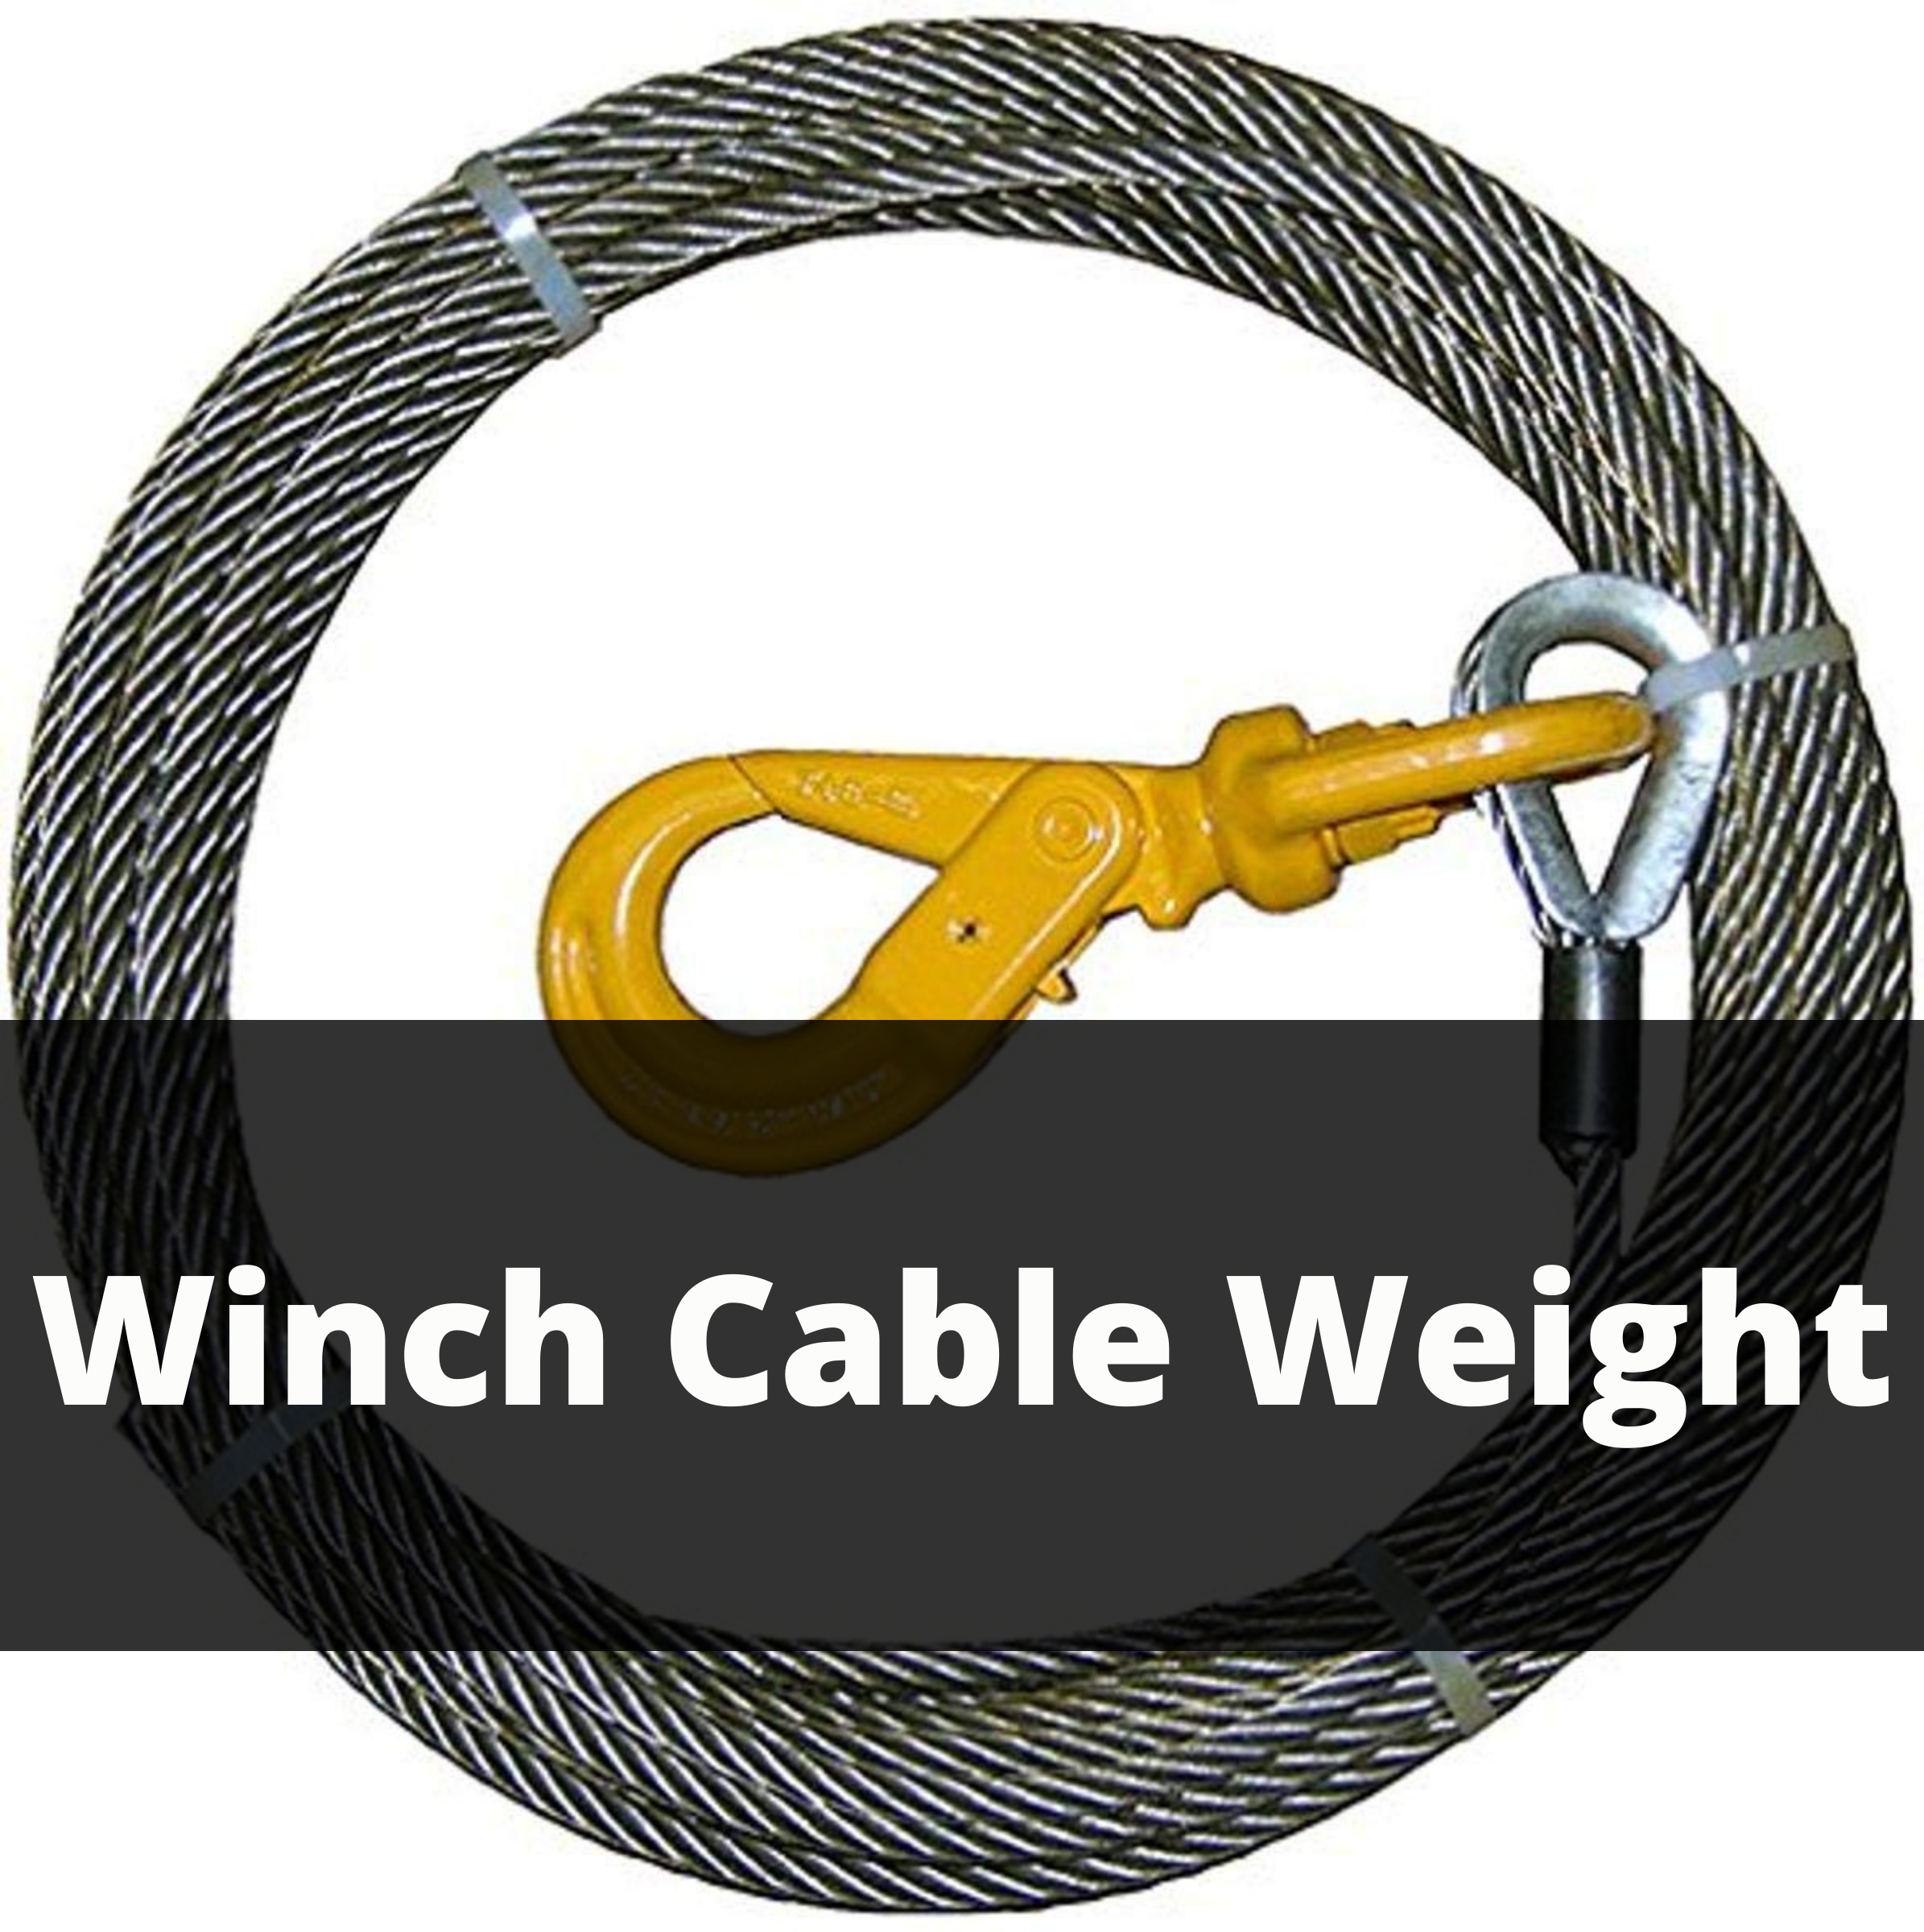 Winch Cable Weight